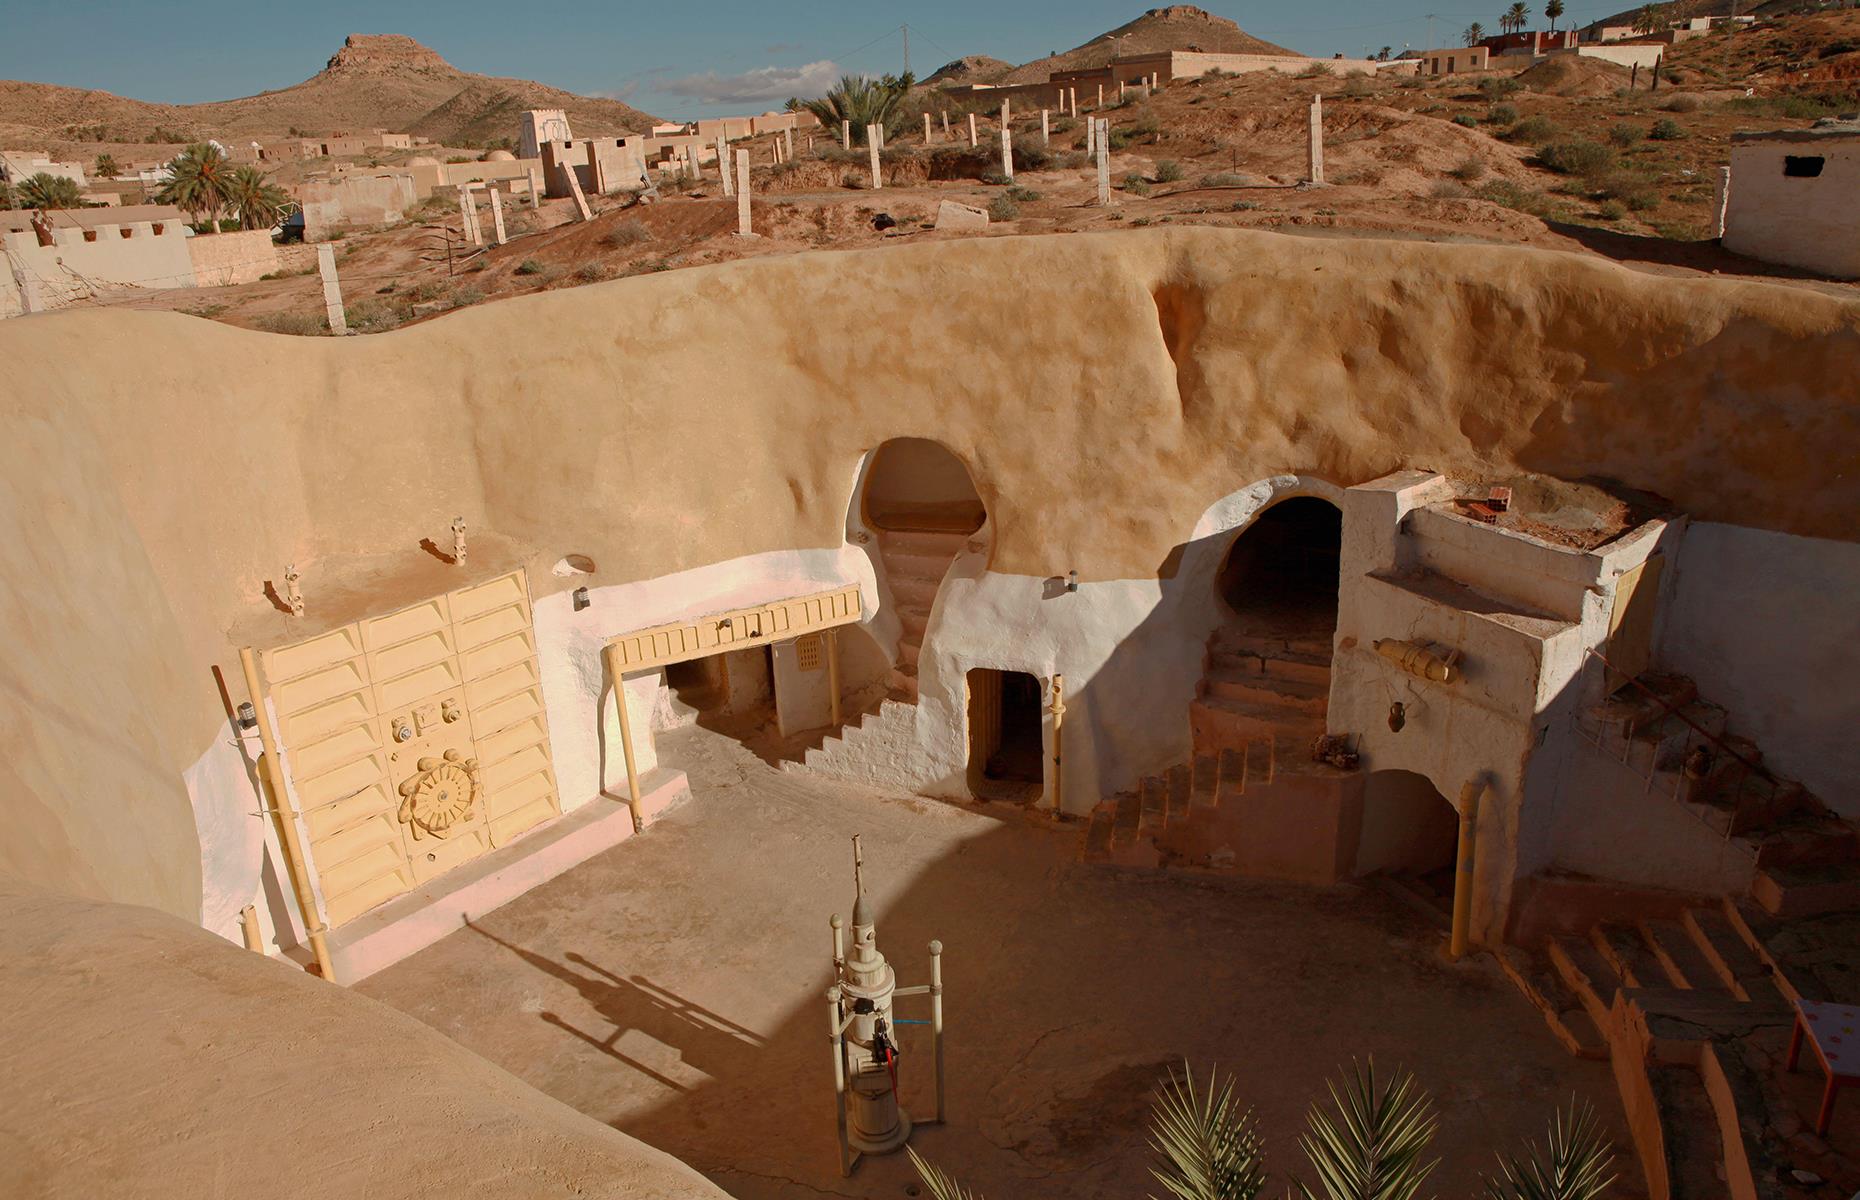 <p>Fans of the <em>Star Wars</em> franchise will appreciate this outpost in central Tunisia. Featured in <em>A New Hope</em> (the first <em>Star Wars</em> film ever released) and again in <em>Attack of the Clones</em>, the hotel doubles as the childhood home of Luke Skywalker on the planet Tatooine. The hotel itself is an excellent example of traditional Berber architecture and features plenty of nods to the famous franchise, including original frescoes and decorations harking back to its time as a film set.</p>